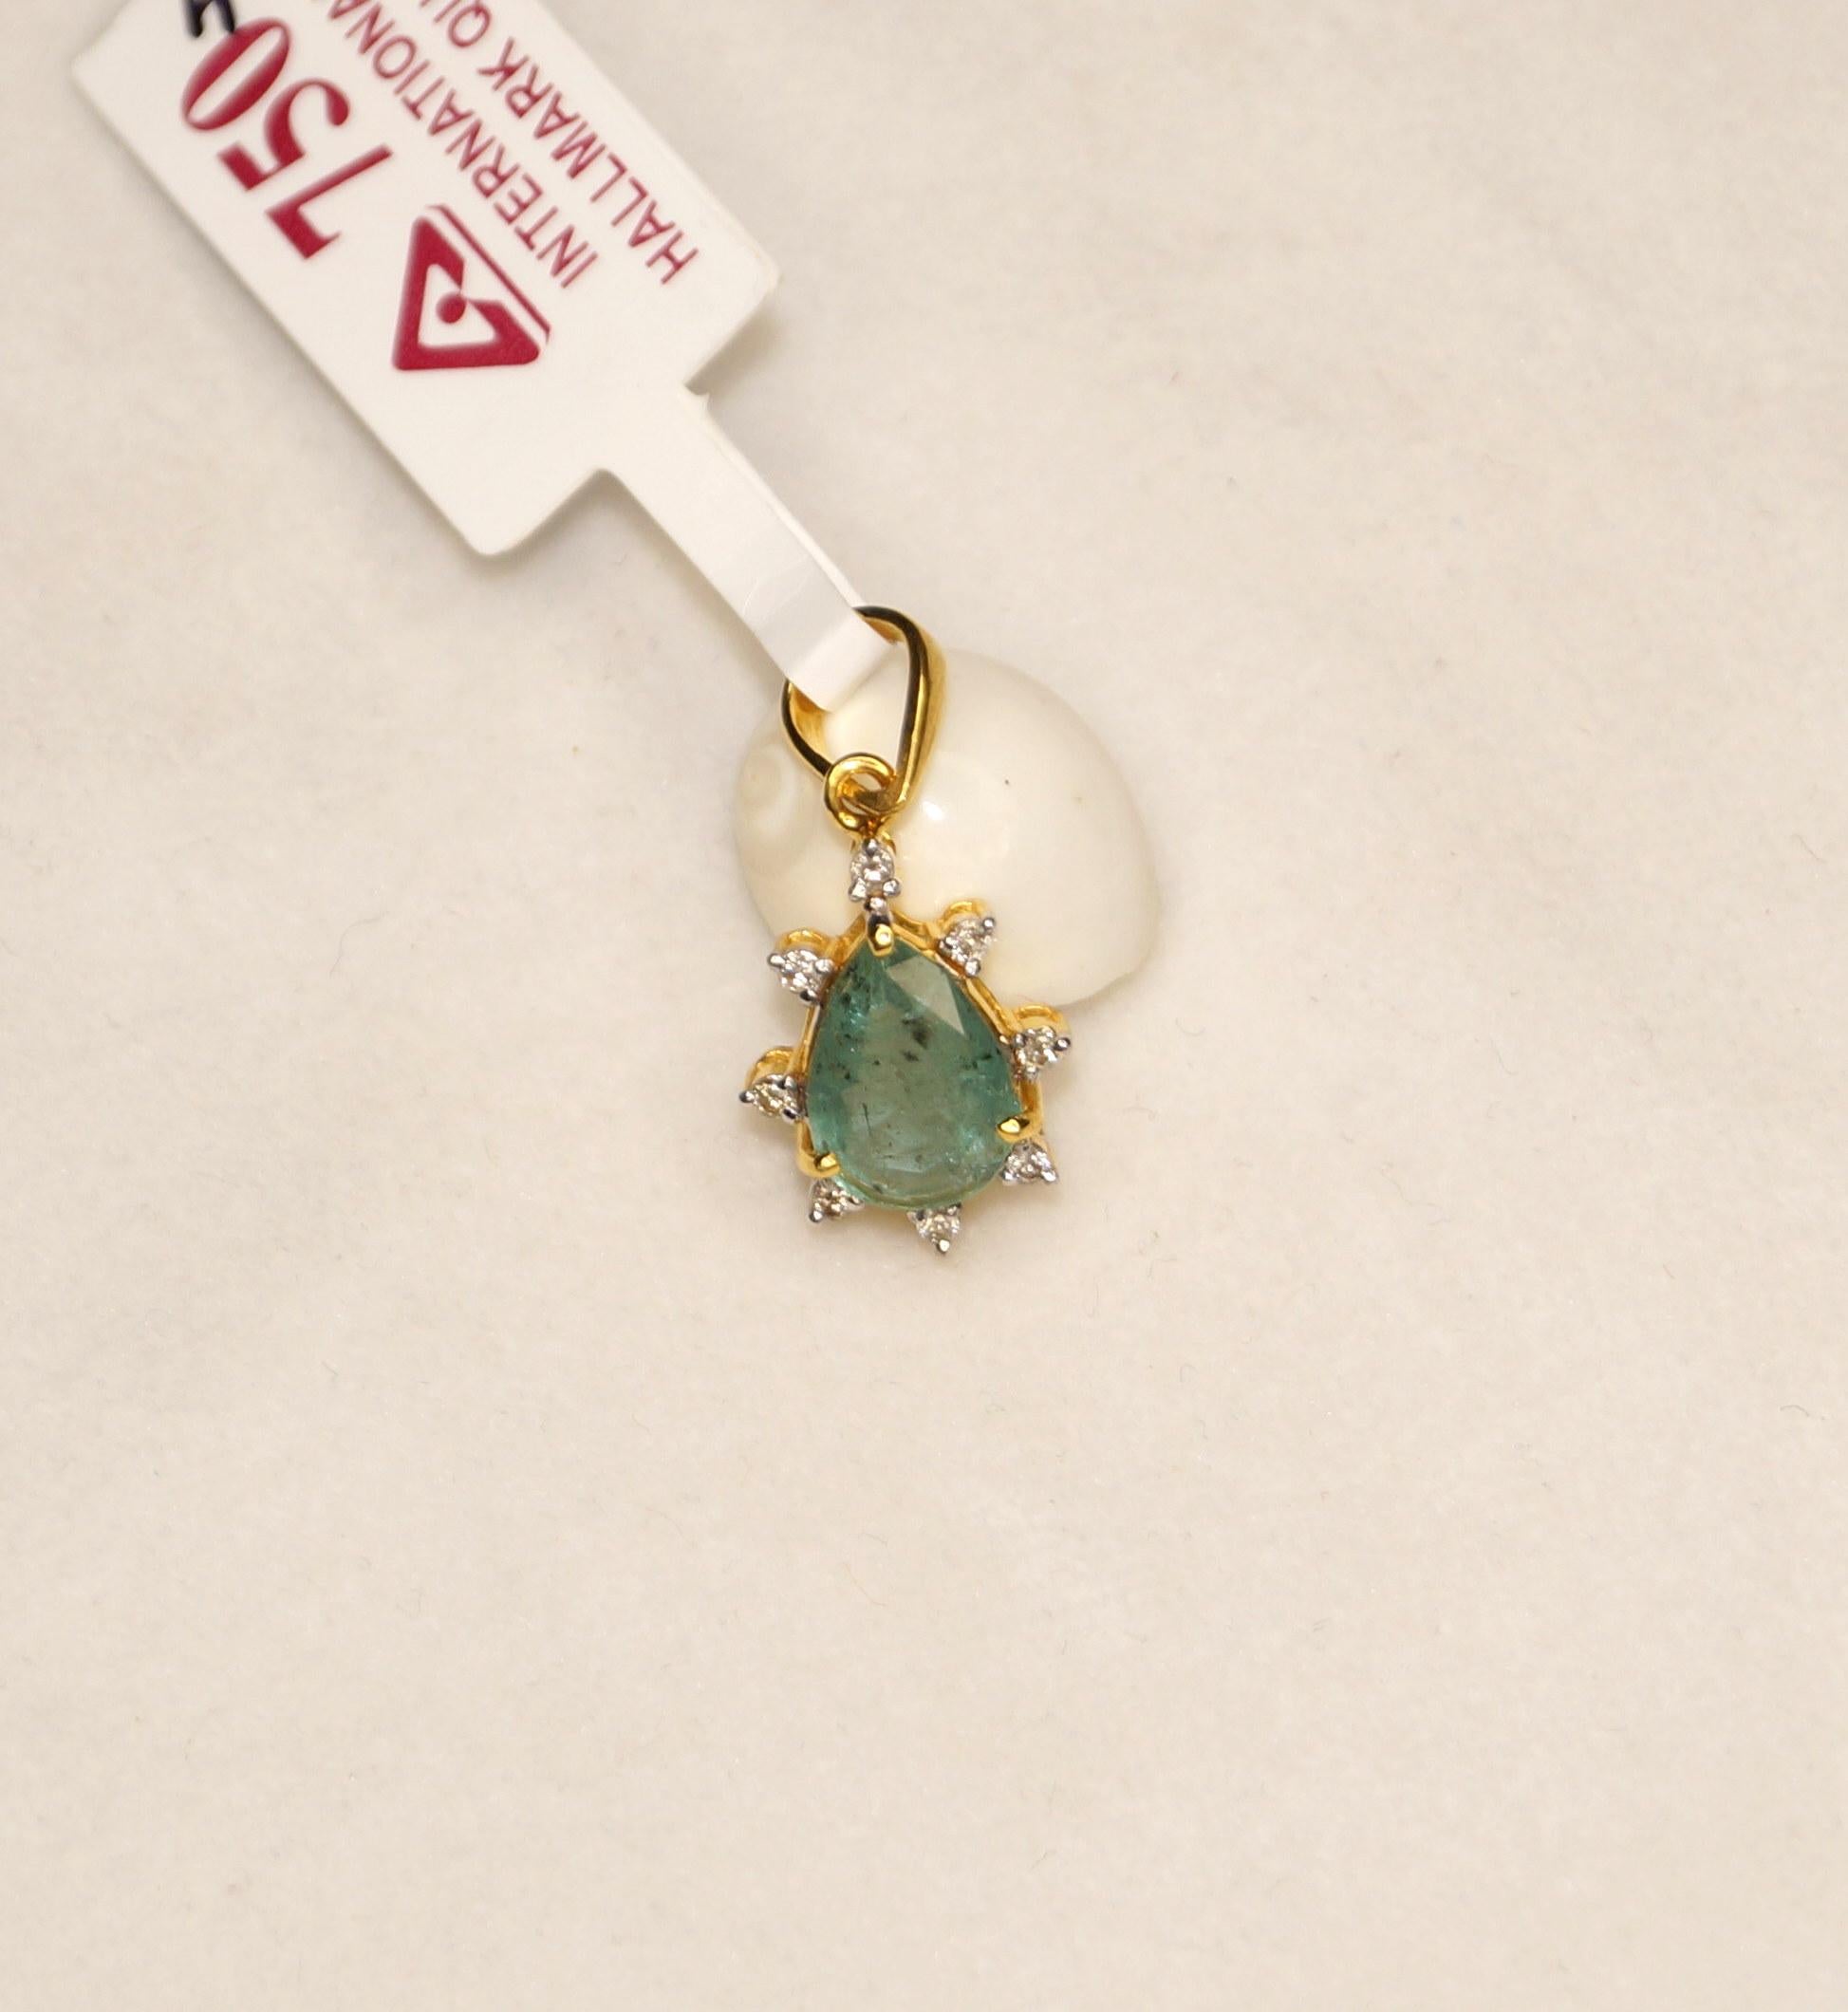 This Stunner Pendant defines class. It completes your everyday look and will also attract special attention on special occasions. This piece of beauty comprises of Natural Zambian Emerald studded in 18K Yellow Gold with excellent diamonds to add